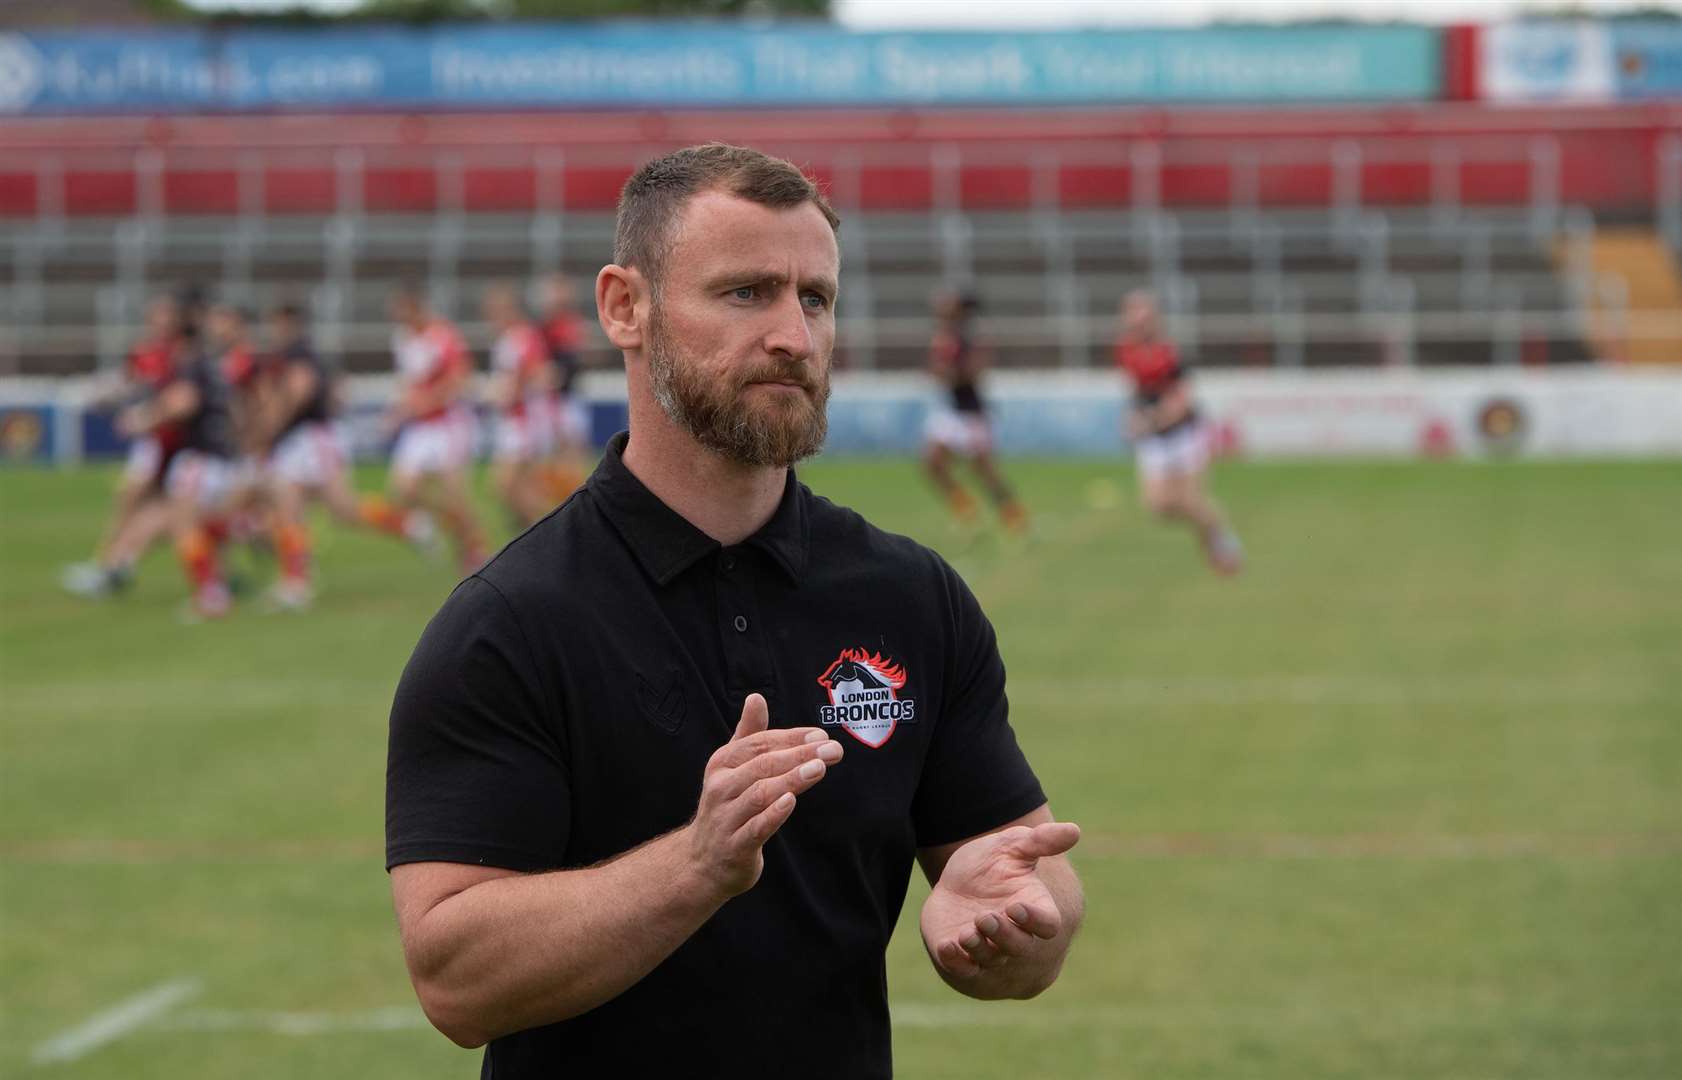 London Broncos Head Coach Mike Eccles before the Betfred Championship match Picture: Alan Stanford